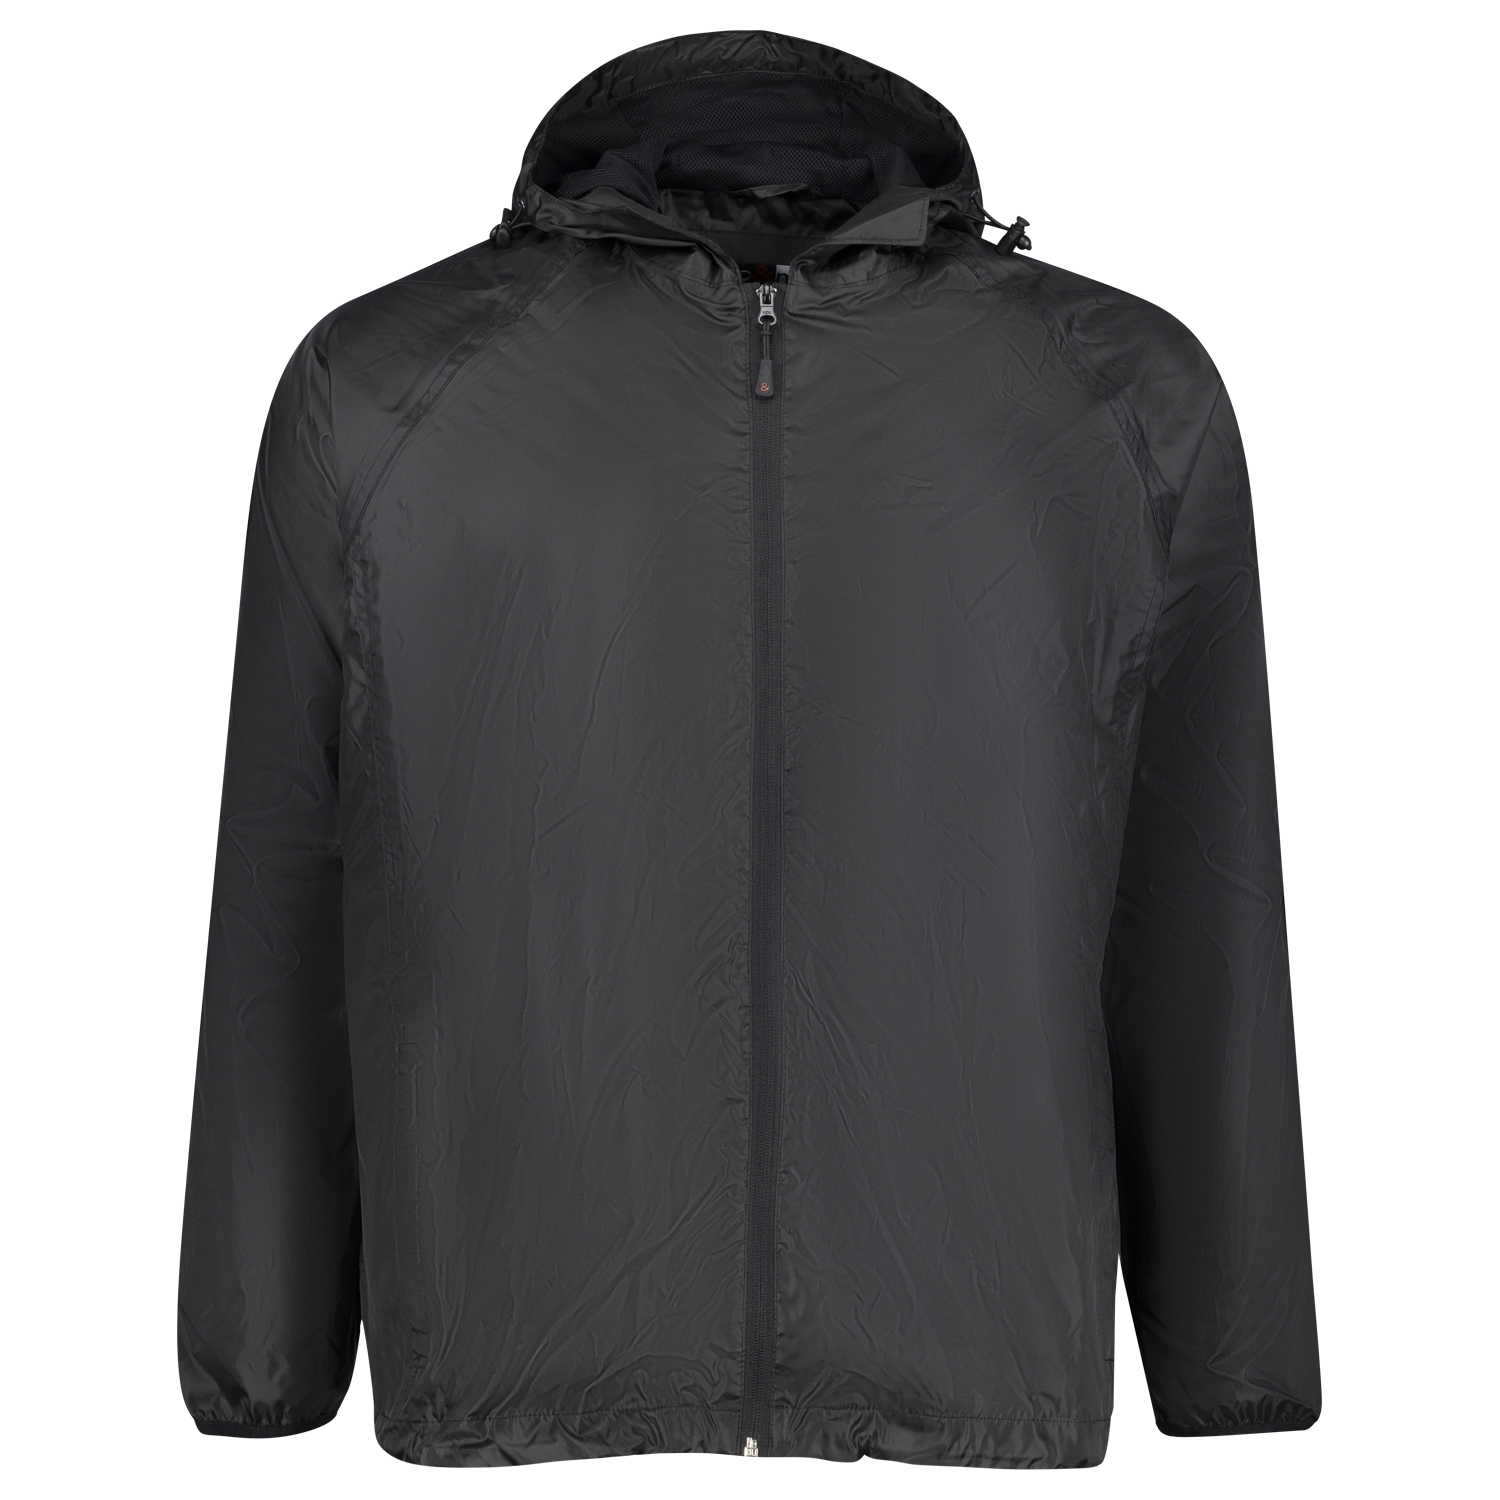 Black wind and rain jacket from marc&mark in plus sizes up to 12XL